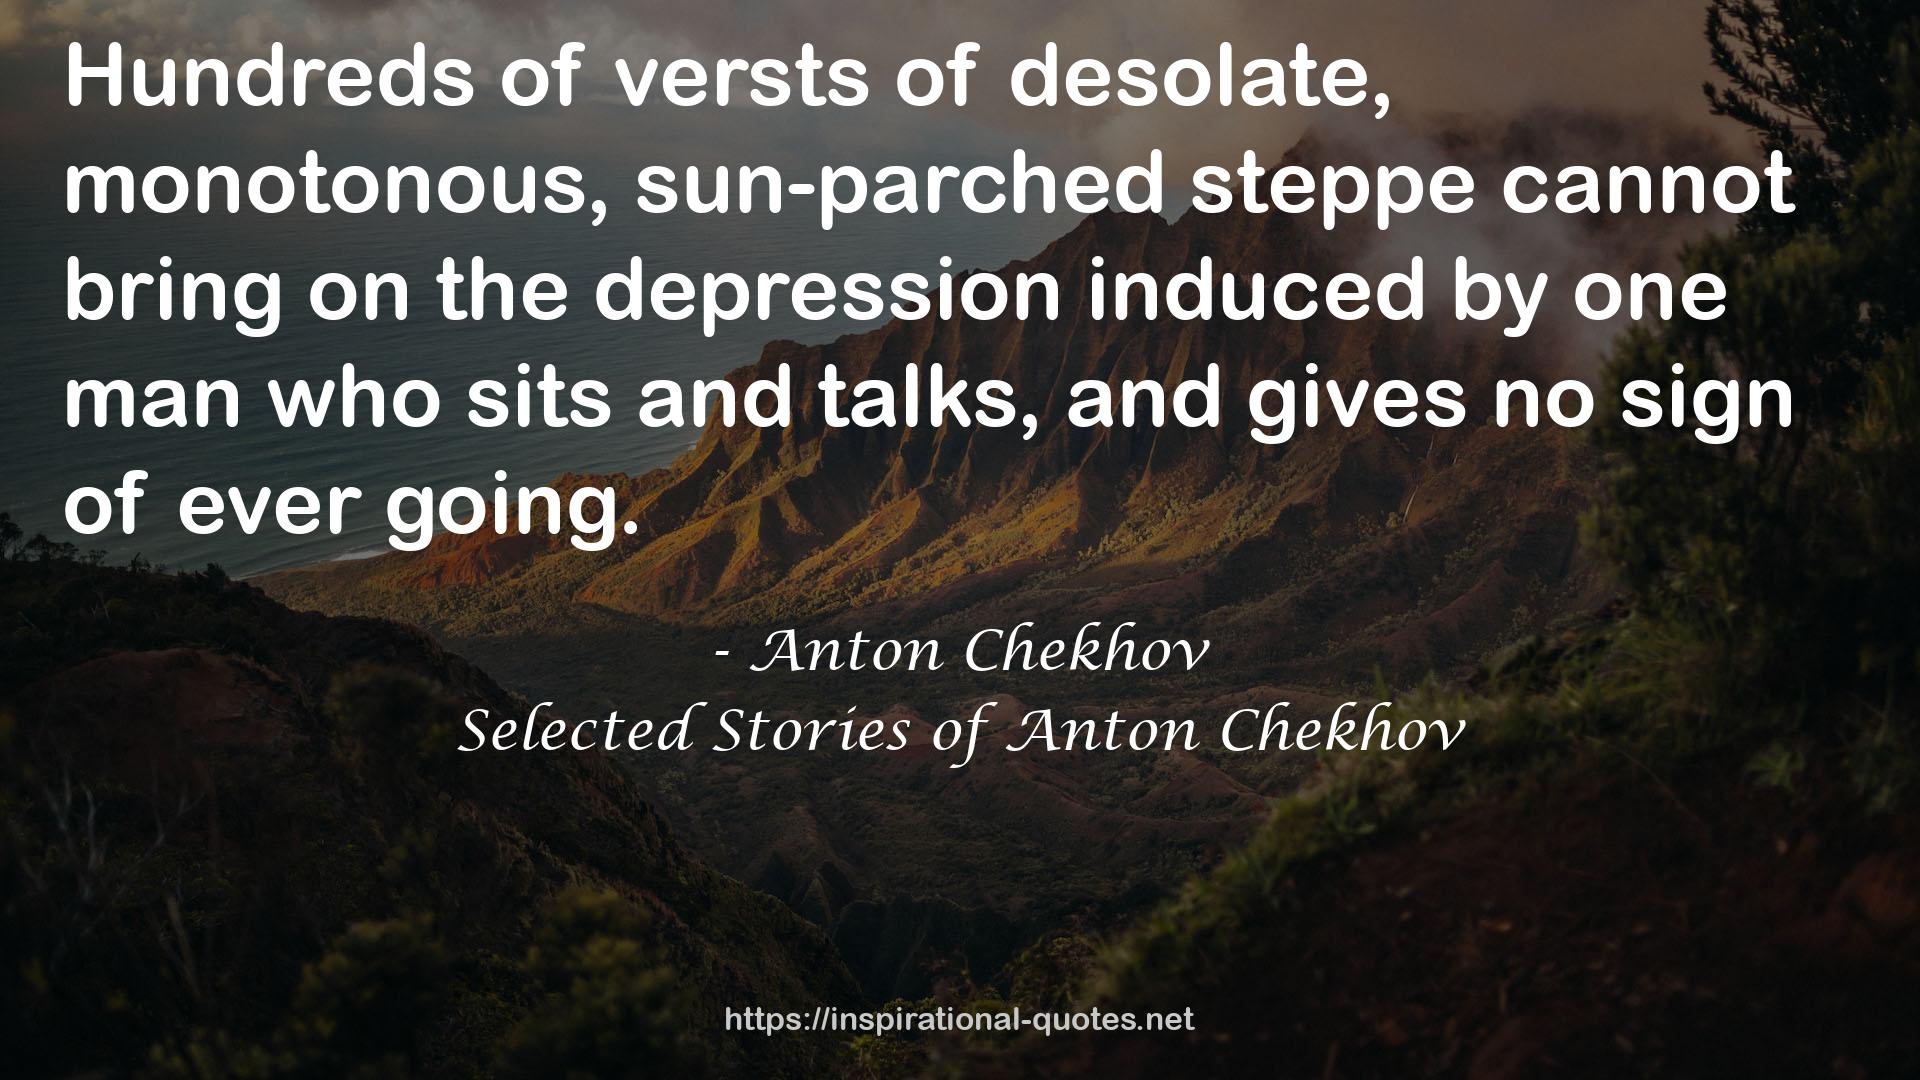 Selected Stories of Anton Chekhov QUOTES